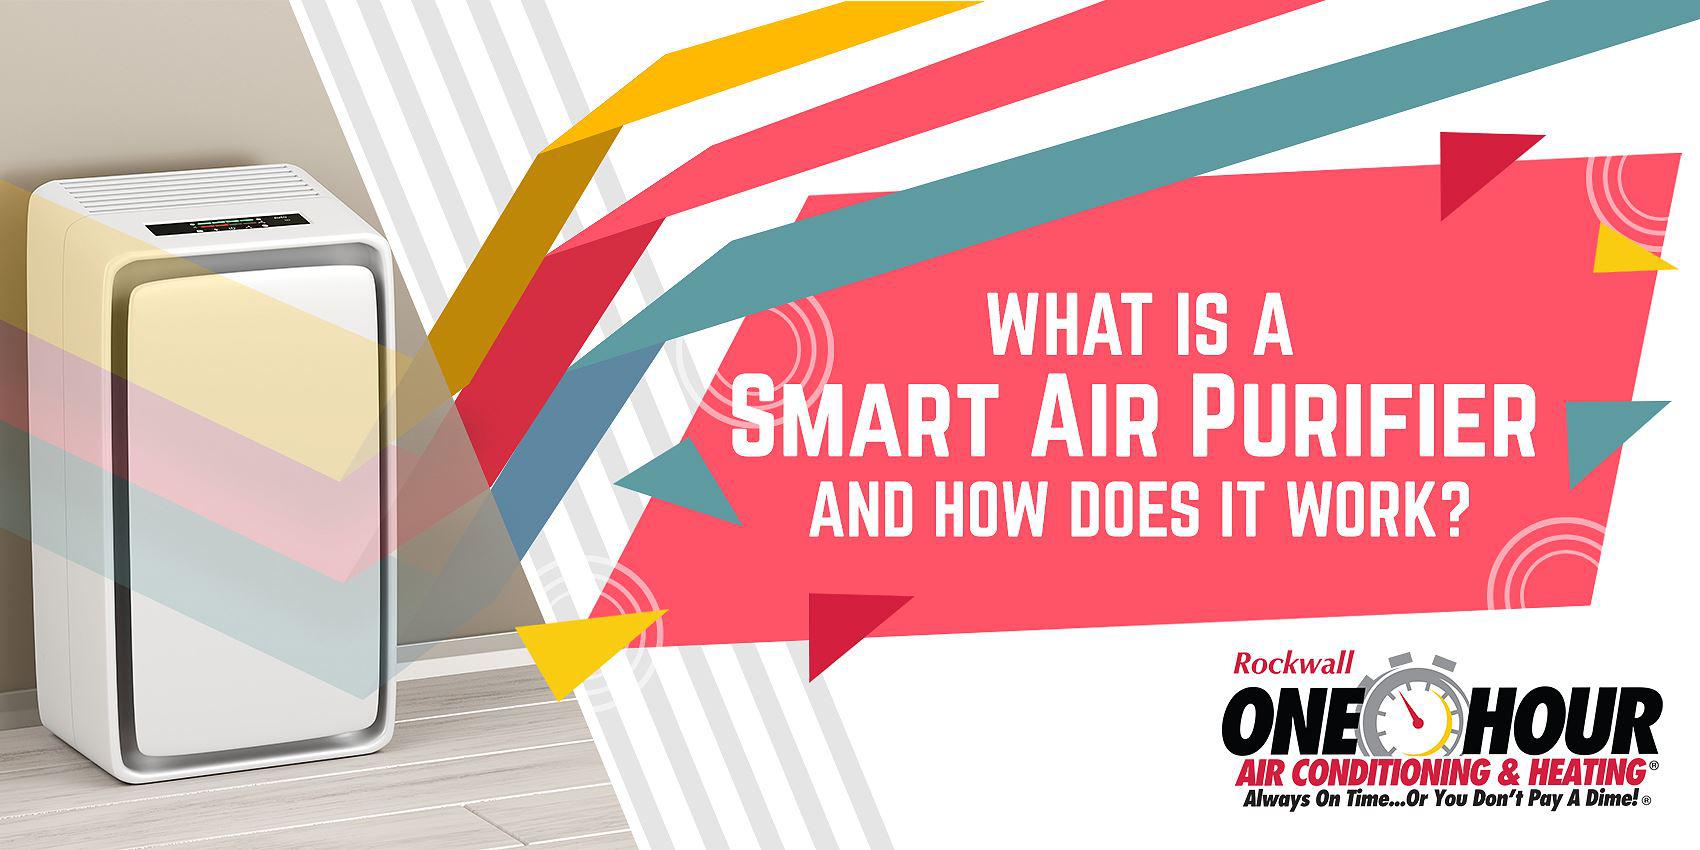 What Is a Smart Air Purifier and How Does It Work?